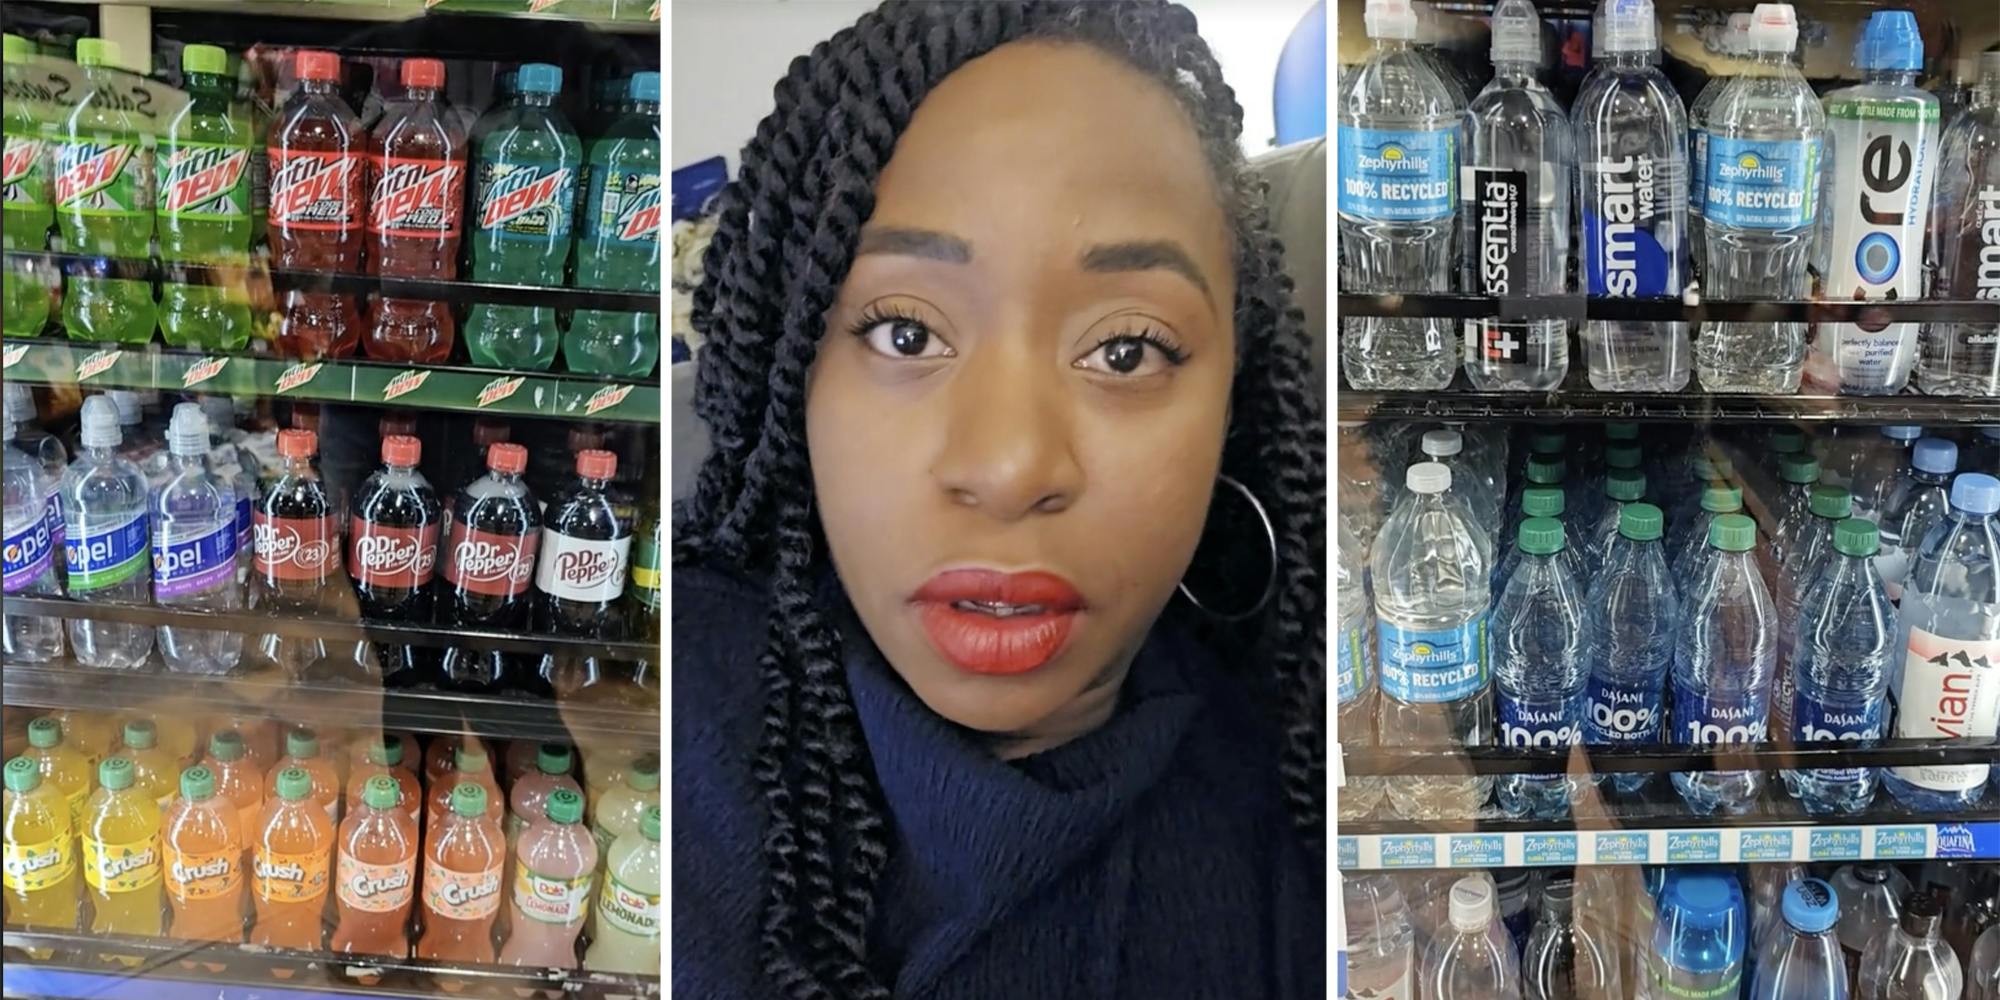 ‘This tactic is not fair to customers’: Woman says gas stations are getting rid of price tags on drinks